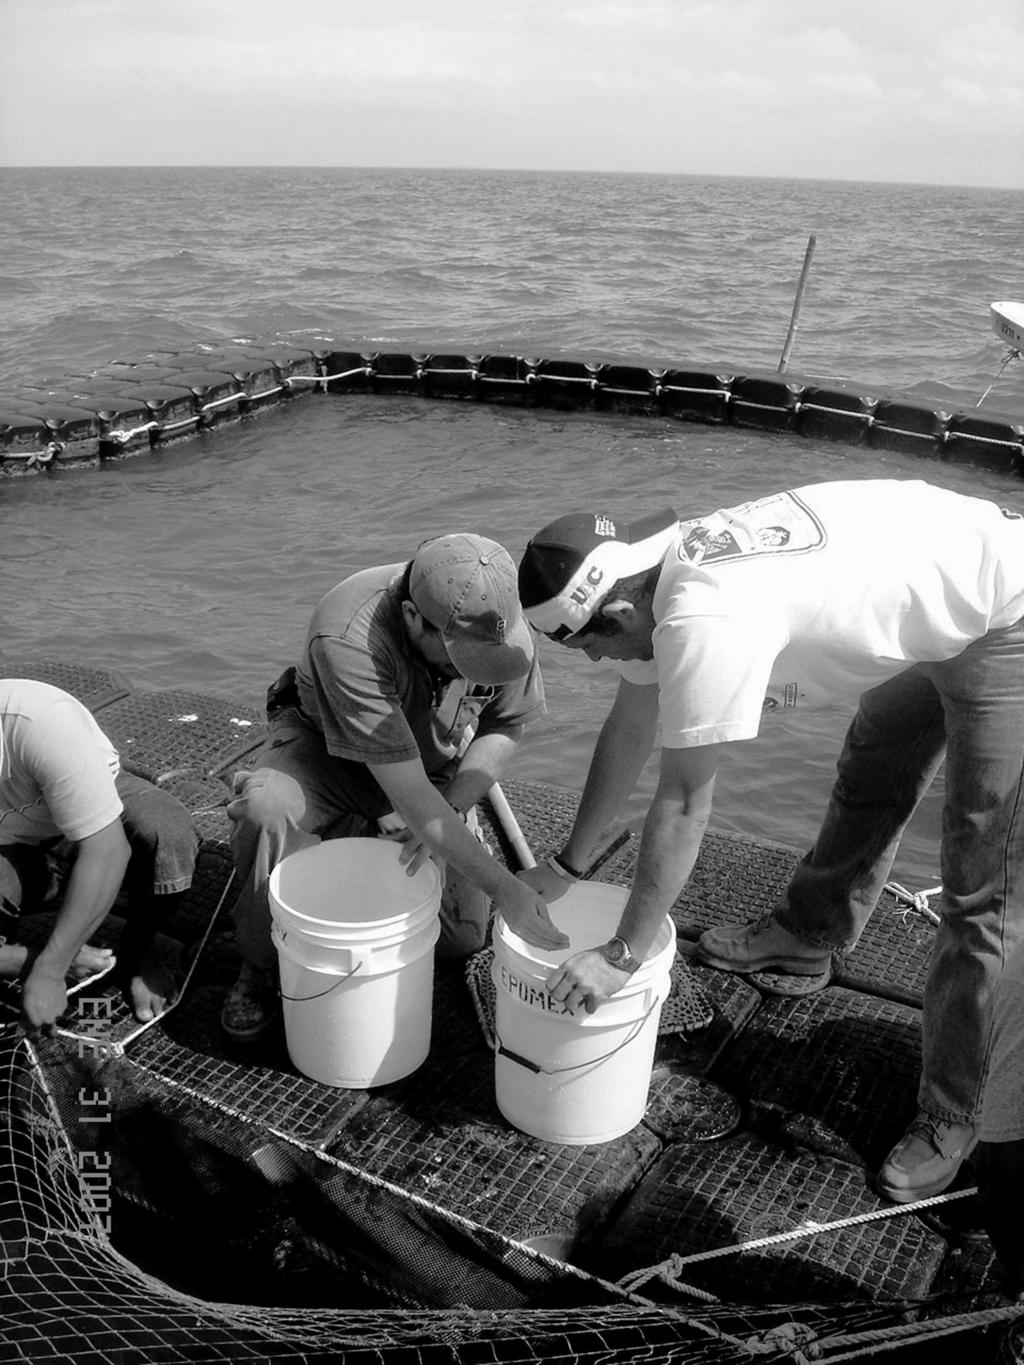 Gulf of Mexico Science, Vol. 28 [2010], No. 1, Art. 4 20 GULF OF MEXICO SCIENCE, 2010, VOL. 28(1 2) Fig. 3. Marine aquaculture, a topic of research at EPOMEX.